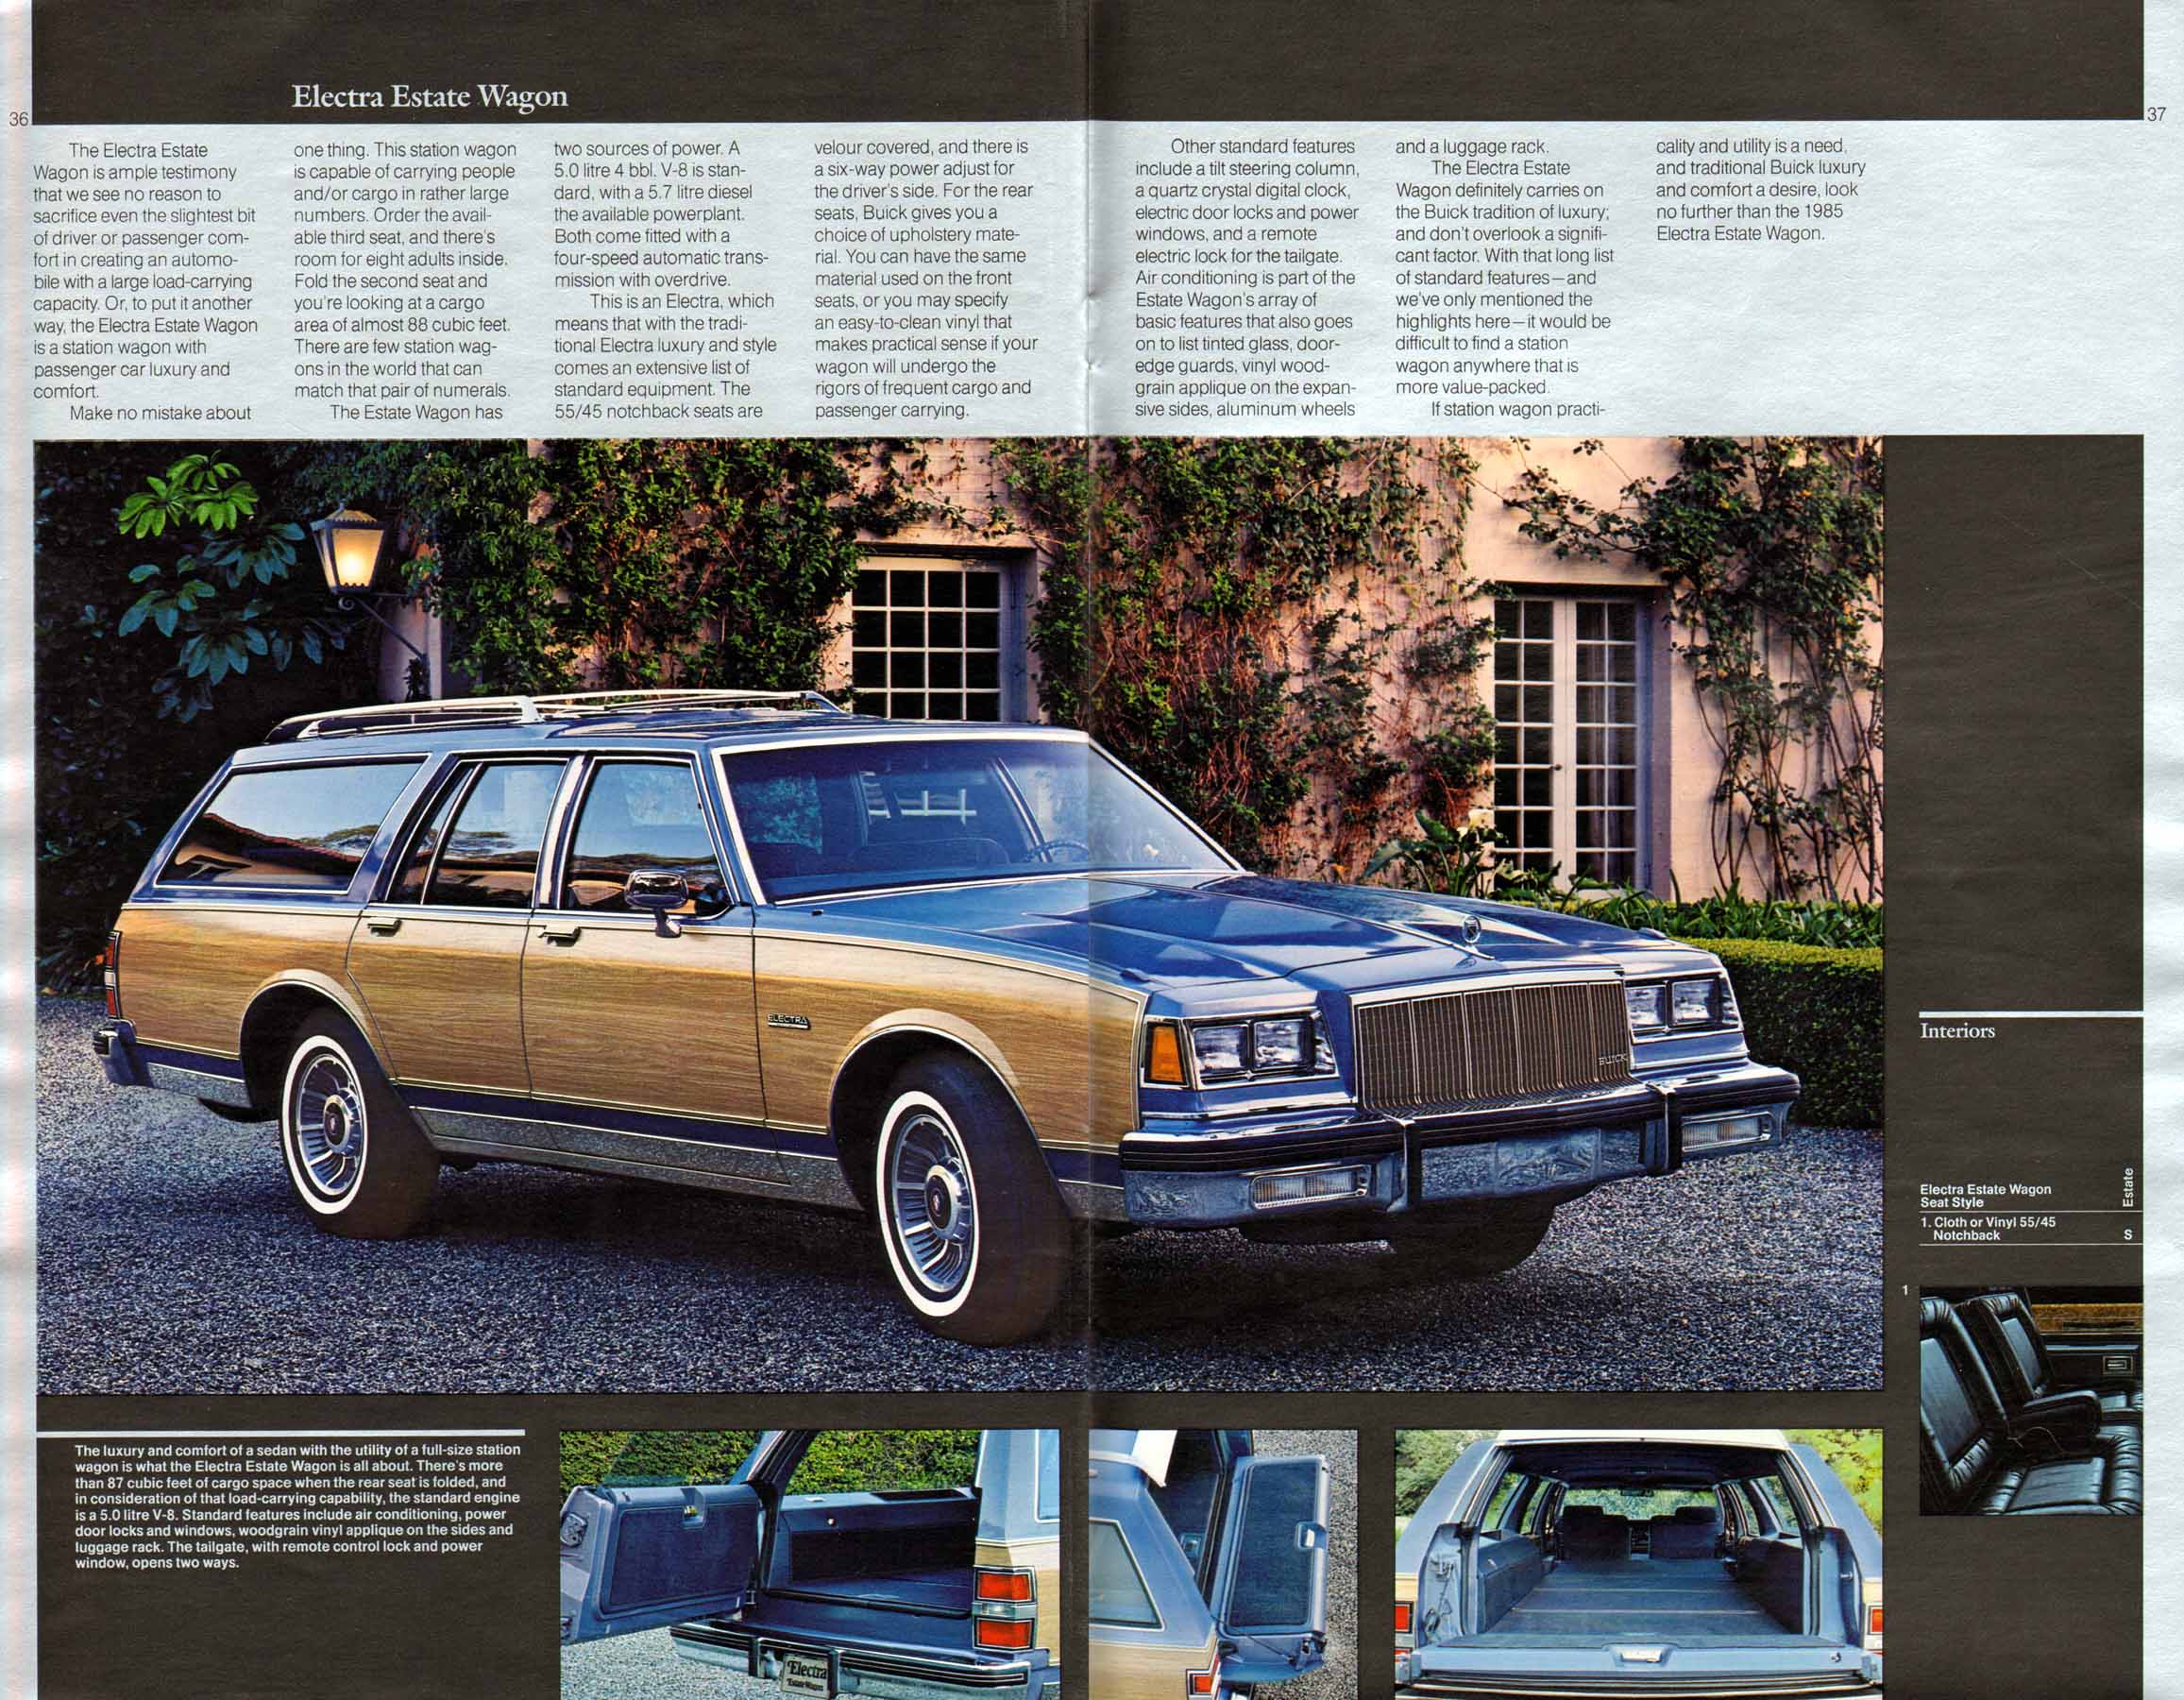 1985 The Art of Buick-36-37